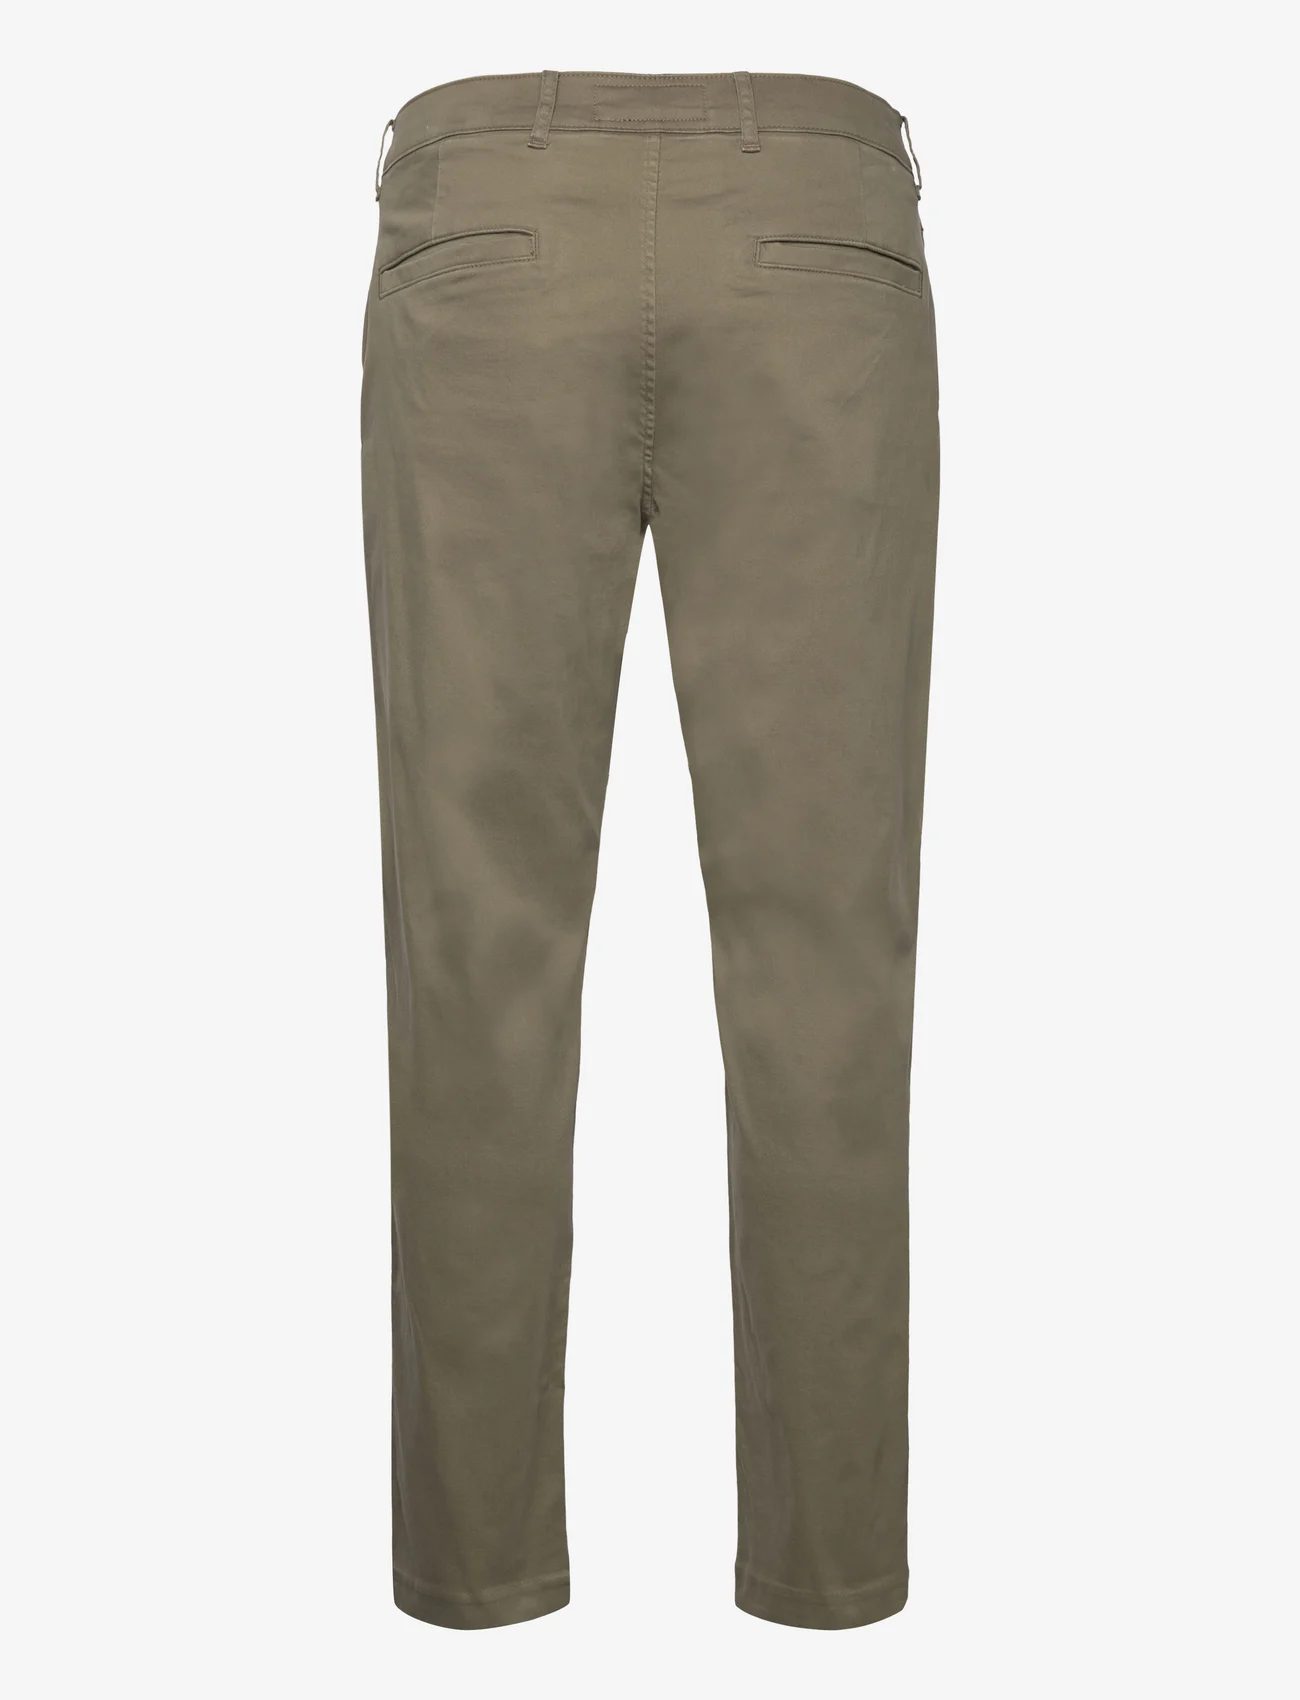 Abercrombie & Fitch - ANF MENS PANTS - chinos - grape leaf - 1